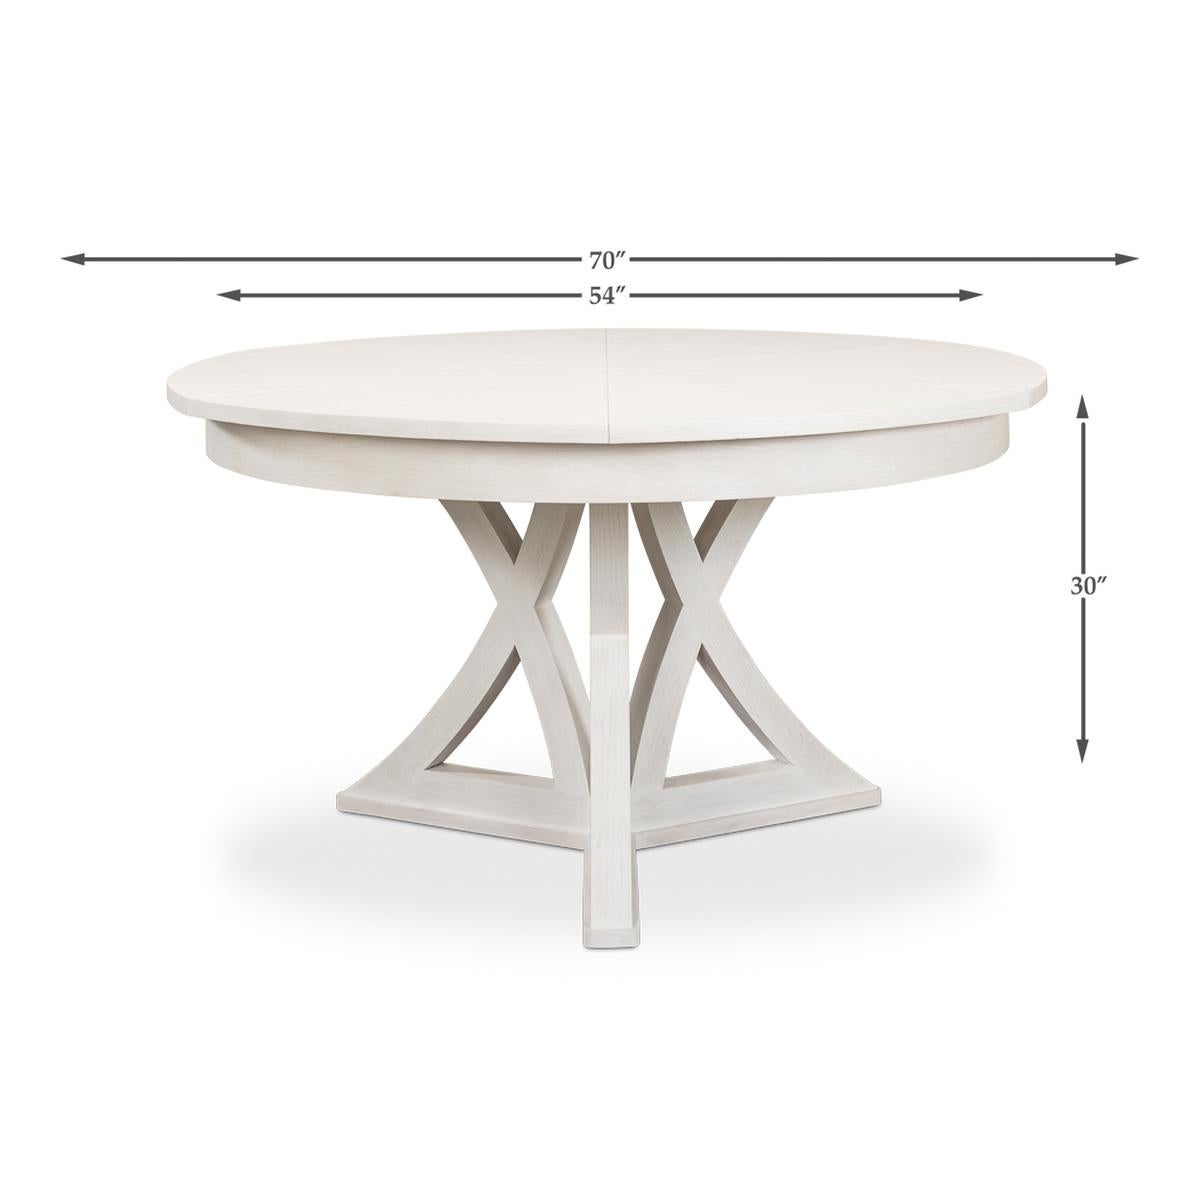 Rustic Round Dining Table, Working White For Sale 4